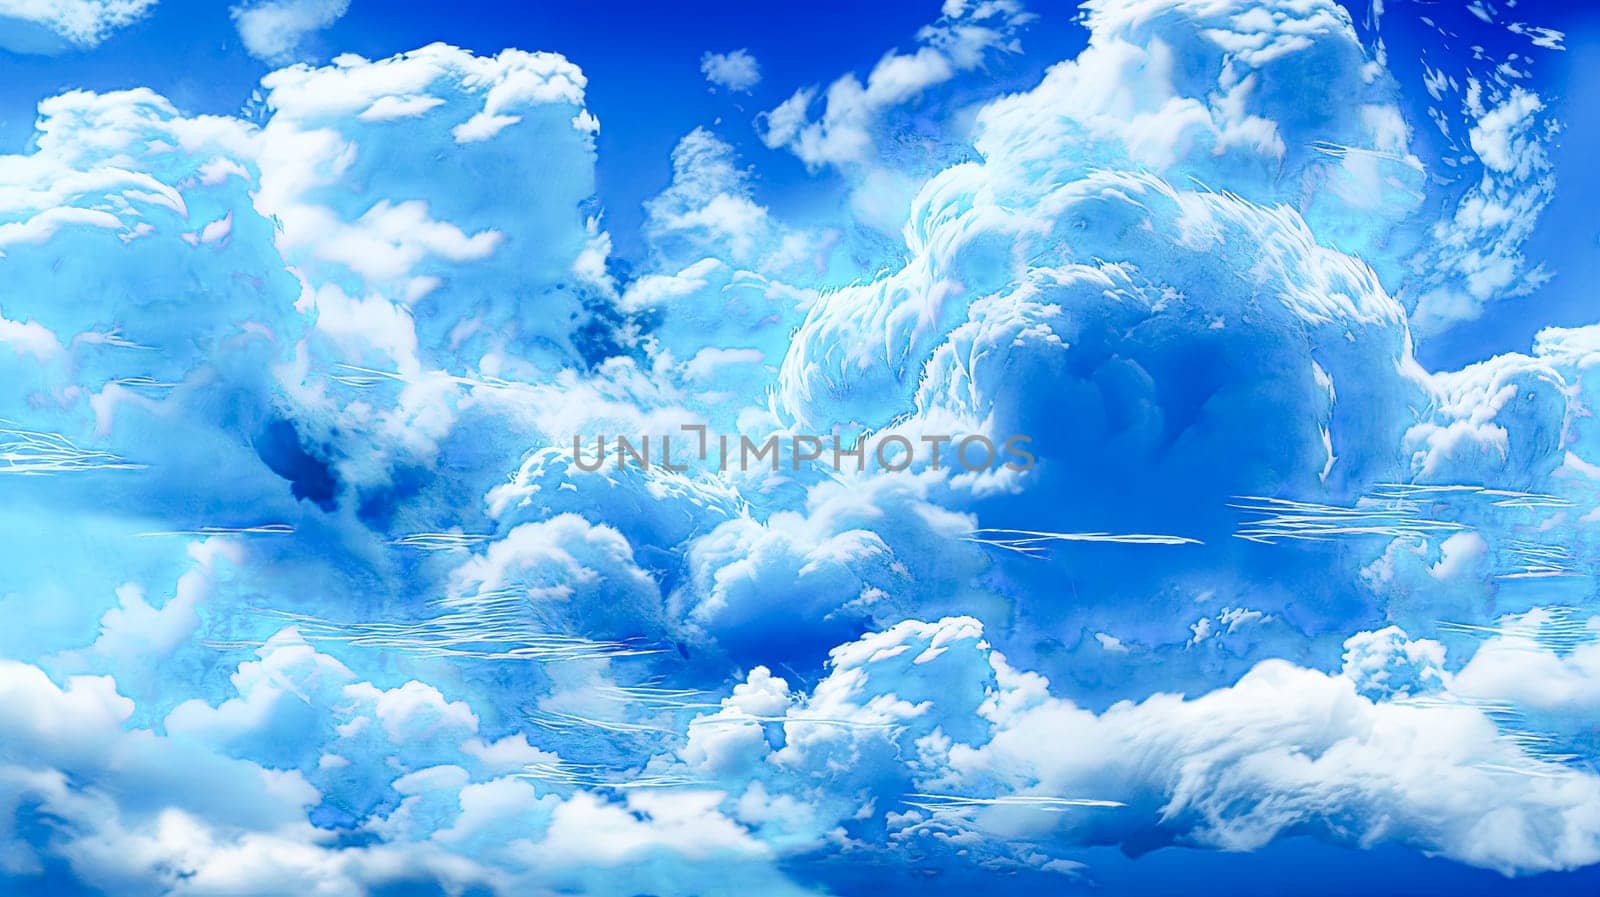 A serene scene captures the beauty of a clear blue sky adorned with fluffy clouds above a tranquil ocean, evoking a sense of peace and serenity.